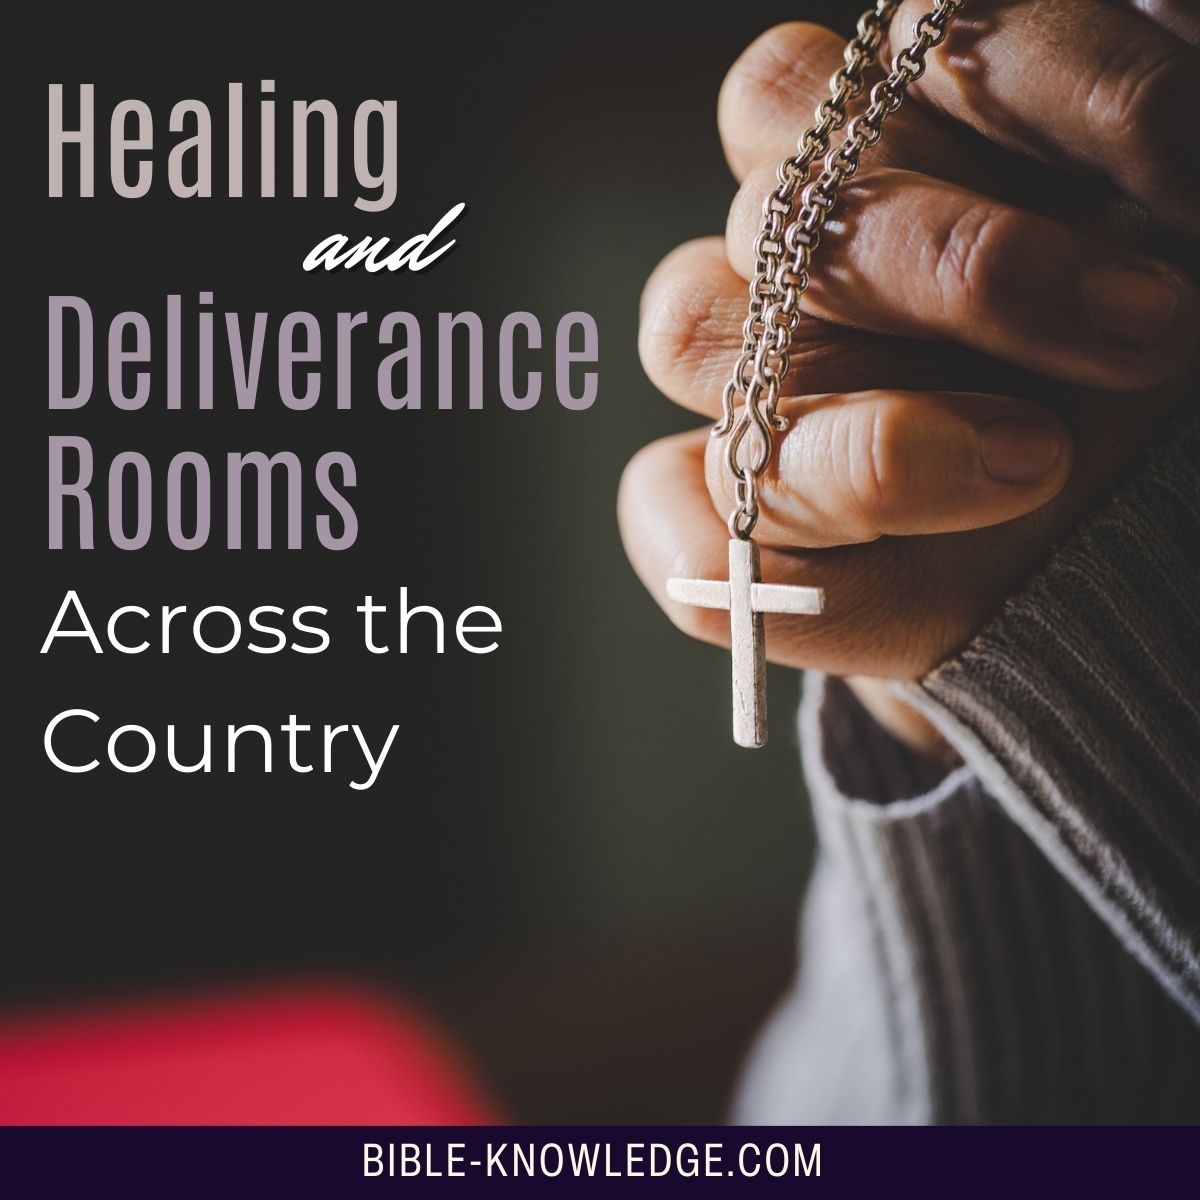 Healing and Deliverance Rooms Across the Country